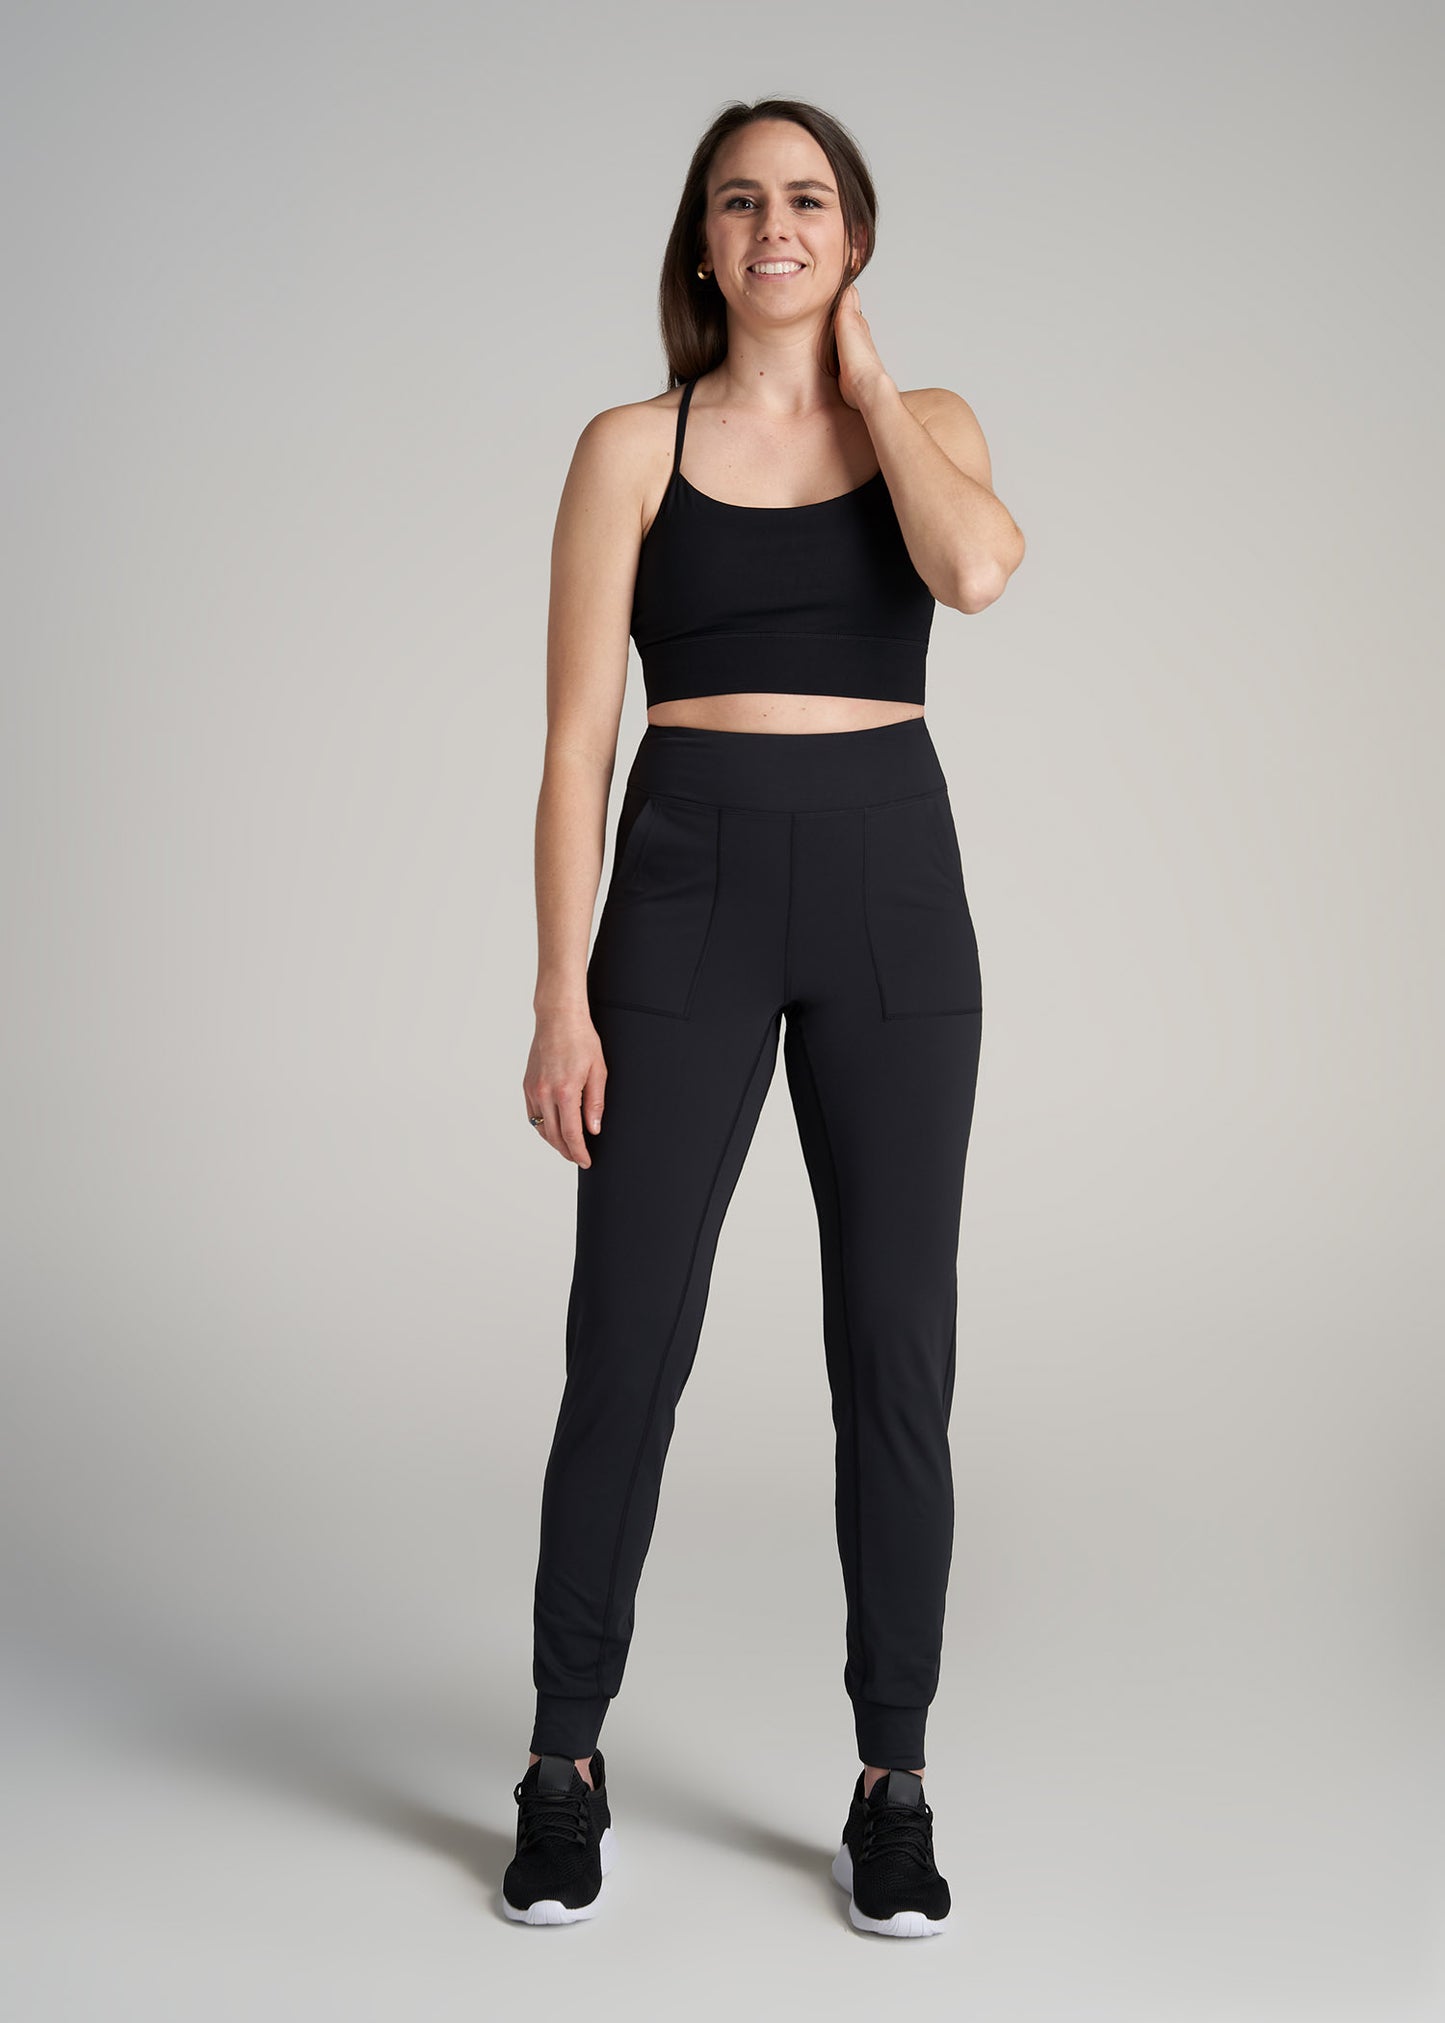 Joggers For Tall Women: Balance Collection Jogger Black – American Tall